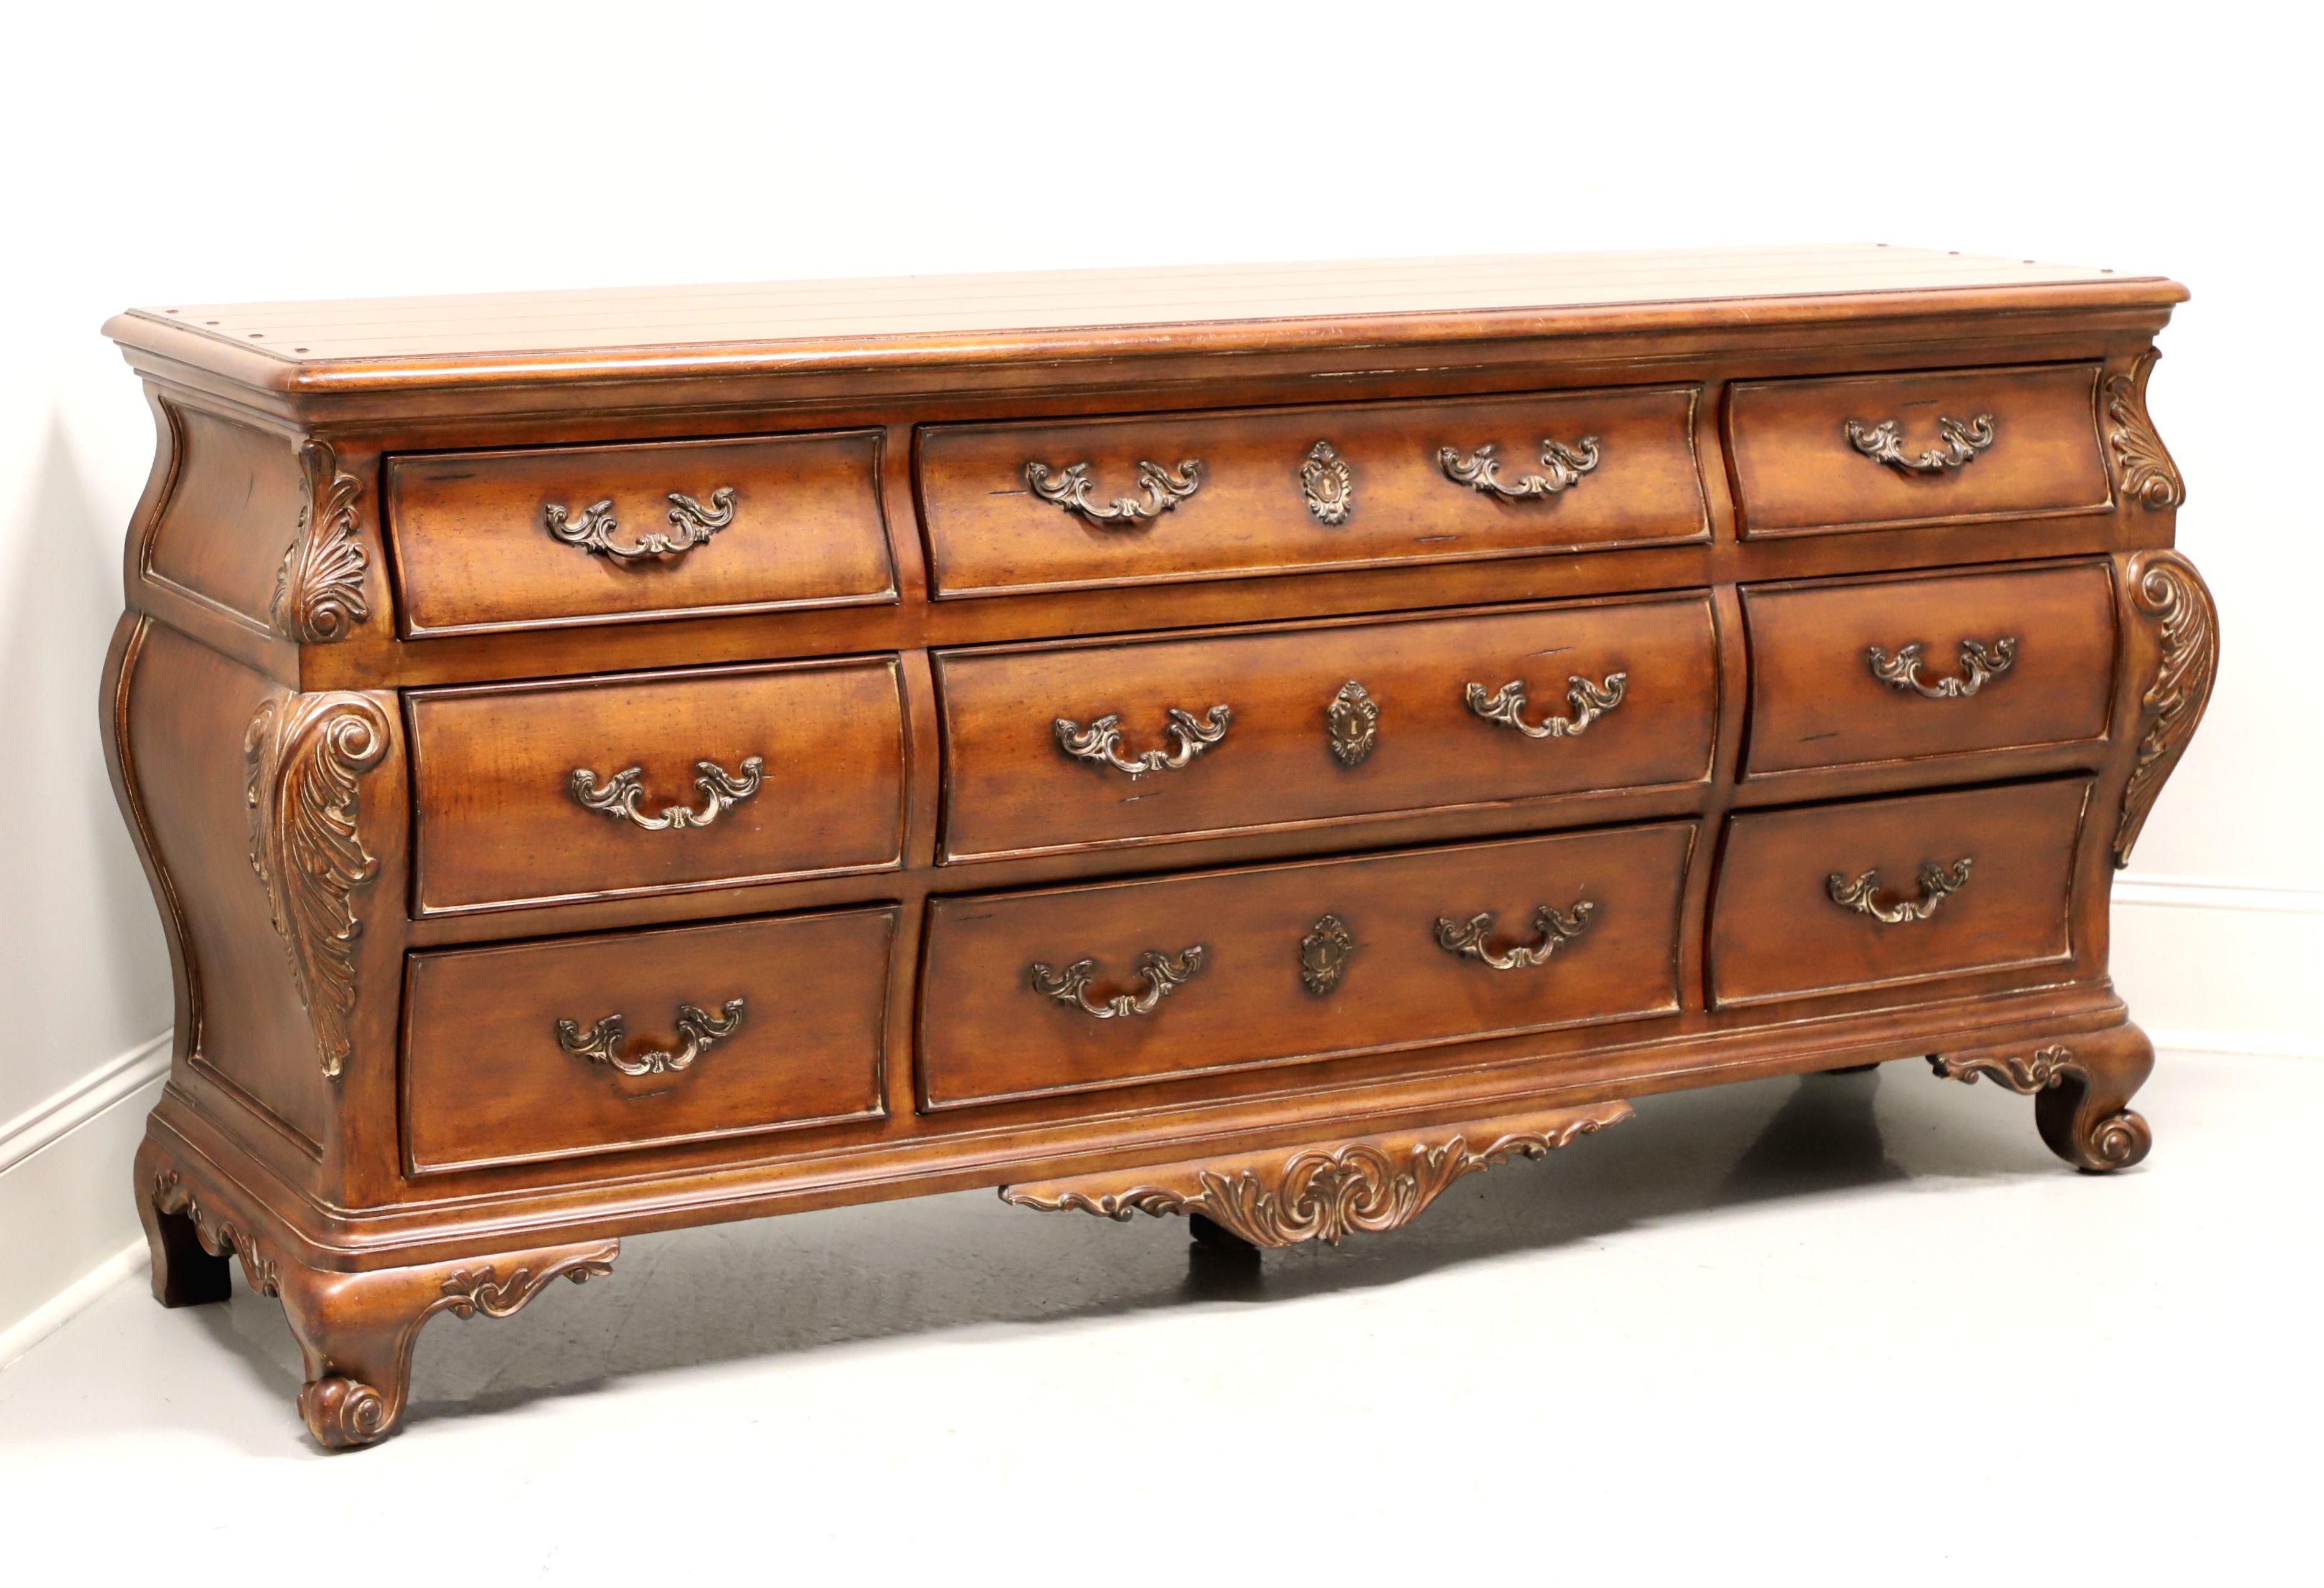 THOMASVILLE Chateau Provence French Country Triple Dresser 6